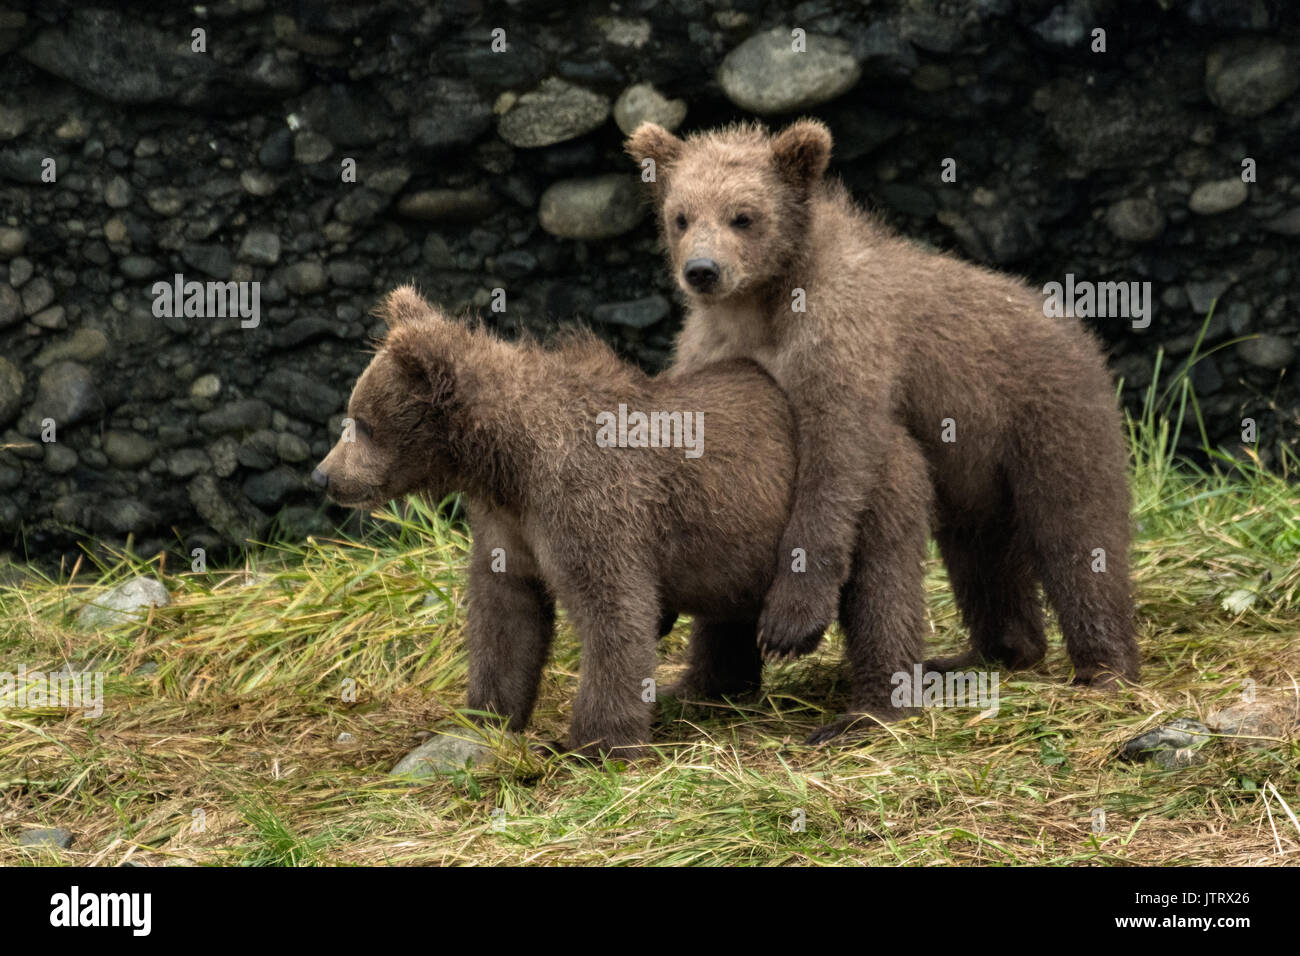 Brown bear cubs cuddle together at the McNeil River State Game Sanctuary on the Kenai Peninsula, Alaska. The remote site is accessed only with a special permit and is the world’s largest seasonal population of brown bears in their natural environment. Stock Photo